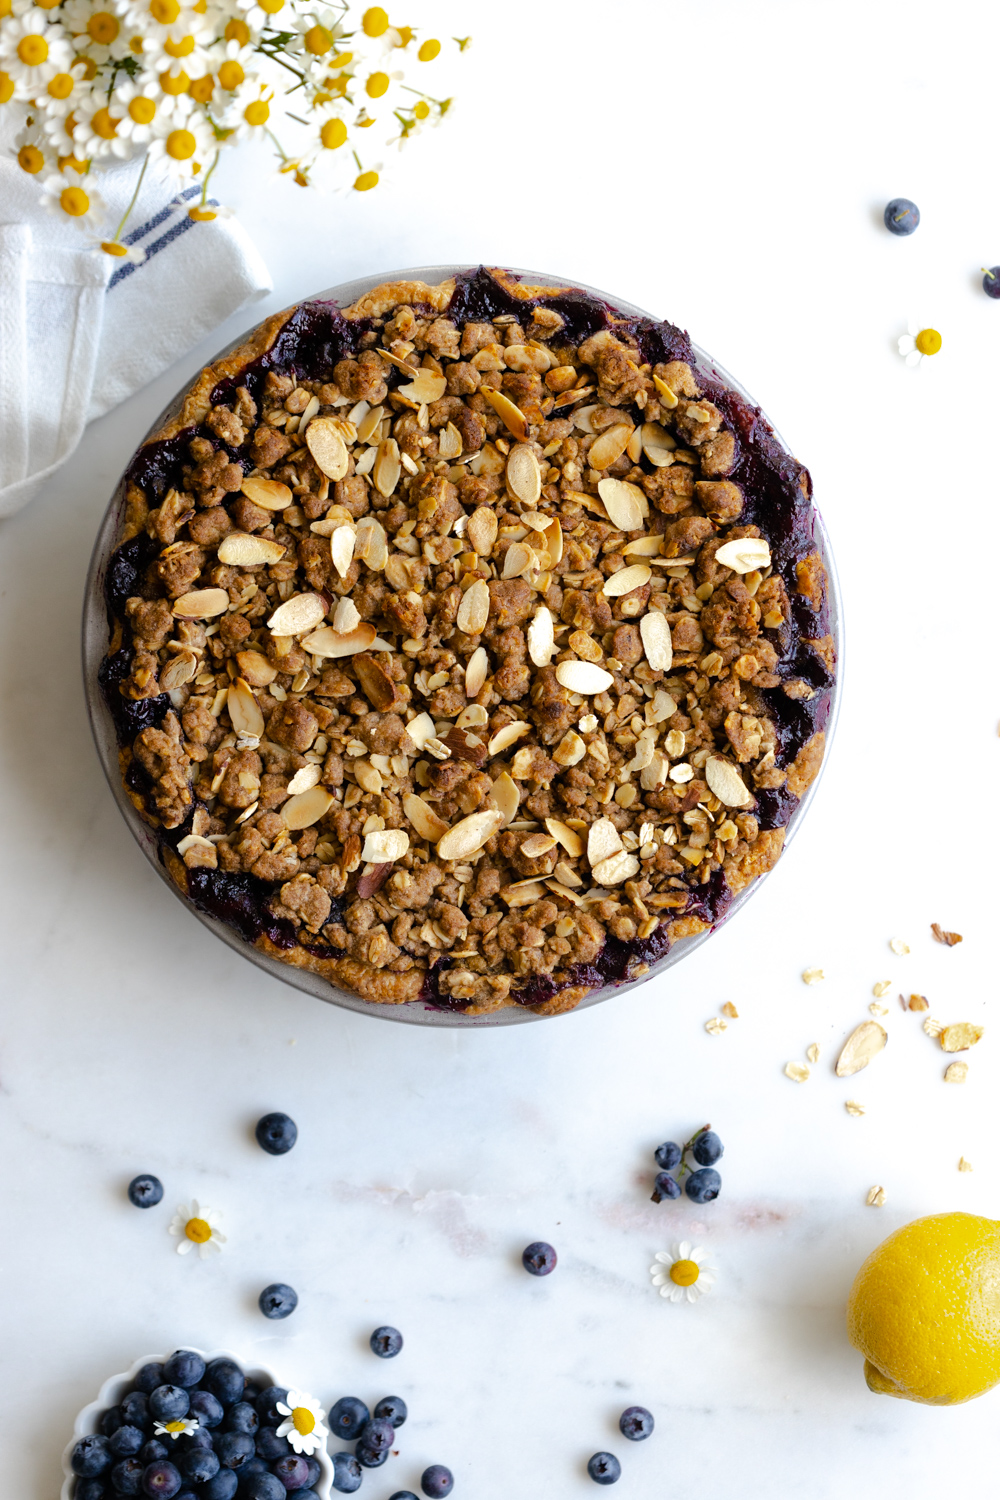 Blueberry Almond Crumble Pie baked